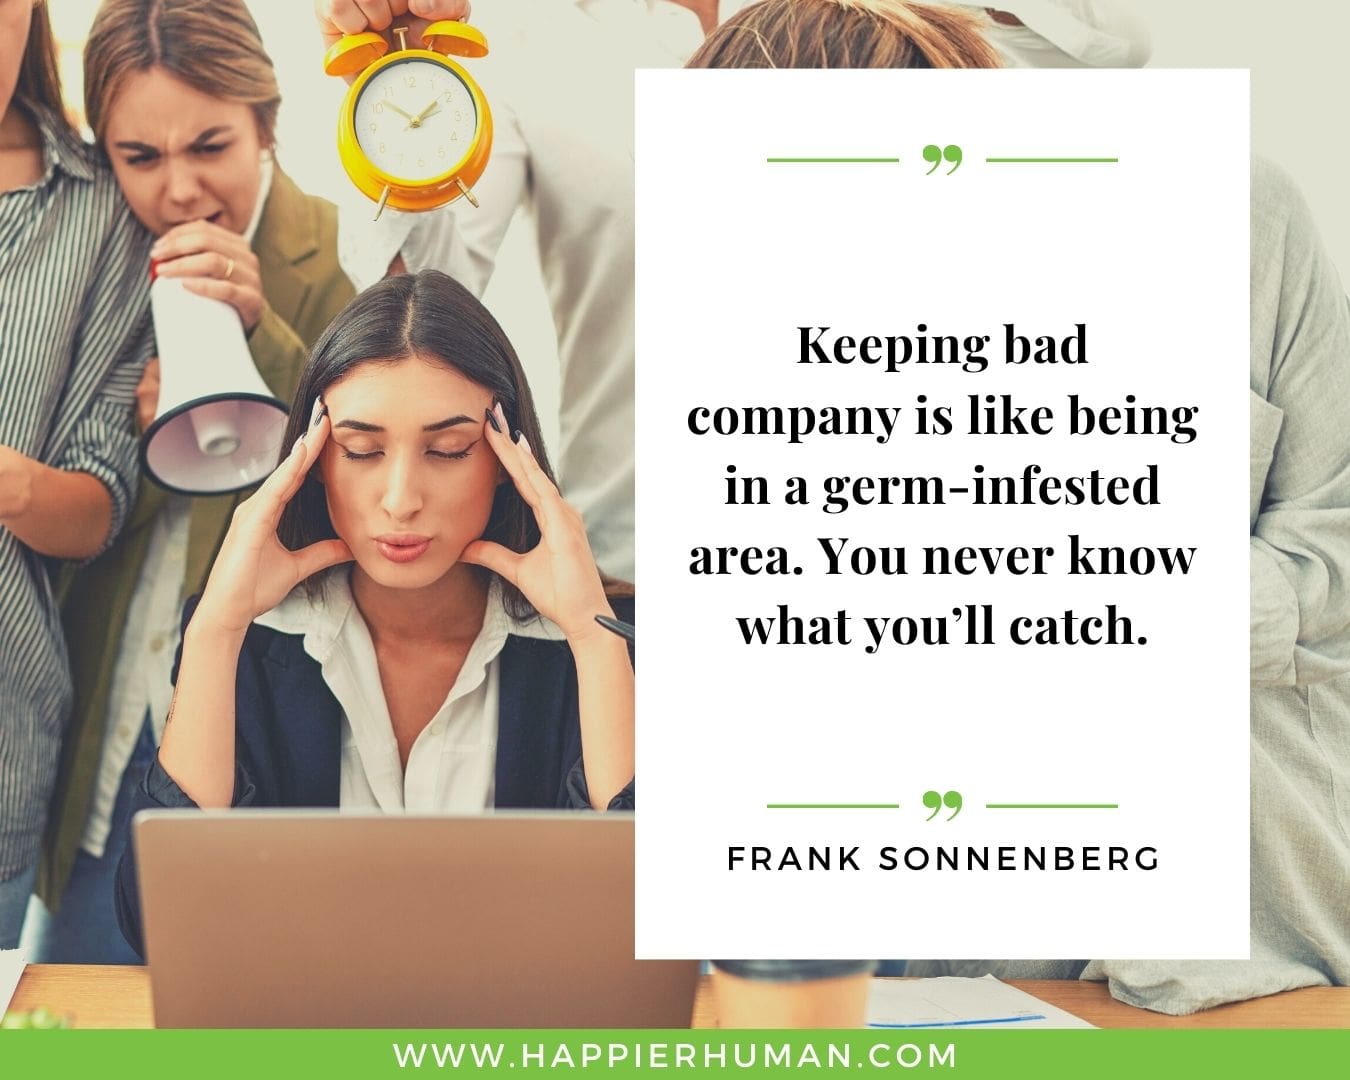 Toxic People Quotes - “Keeping bad company is like being in a germ-infested area. You never know what you’ll catch.” – Frank Sonnenberg